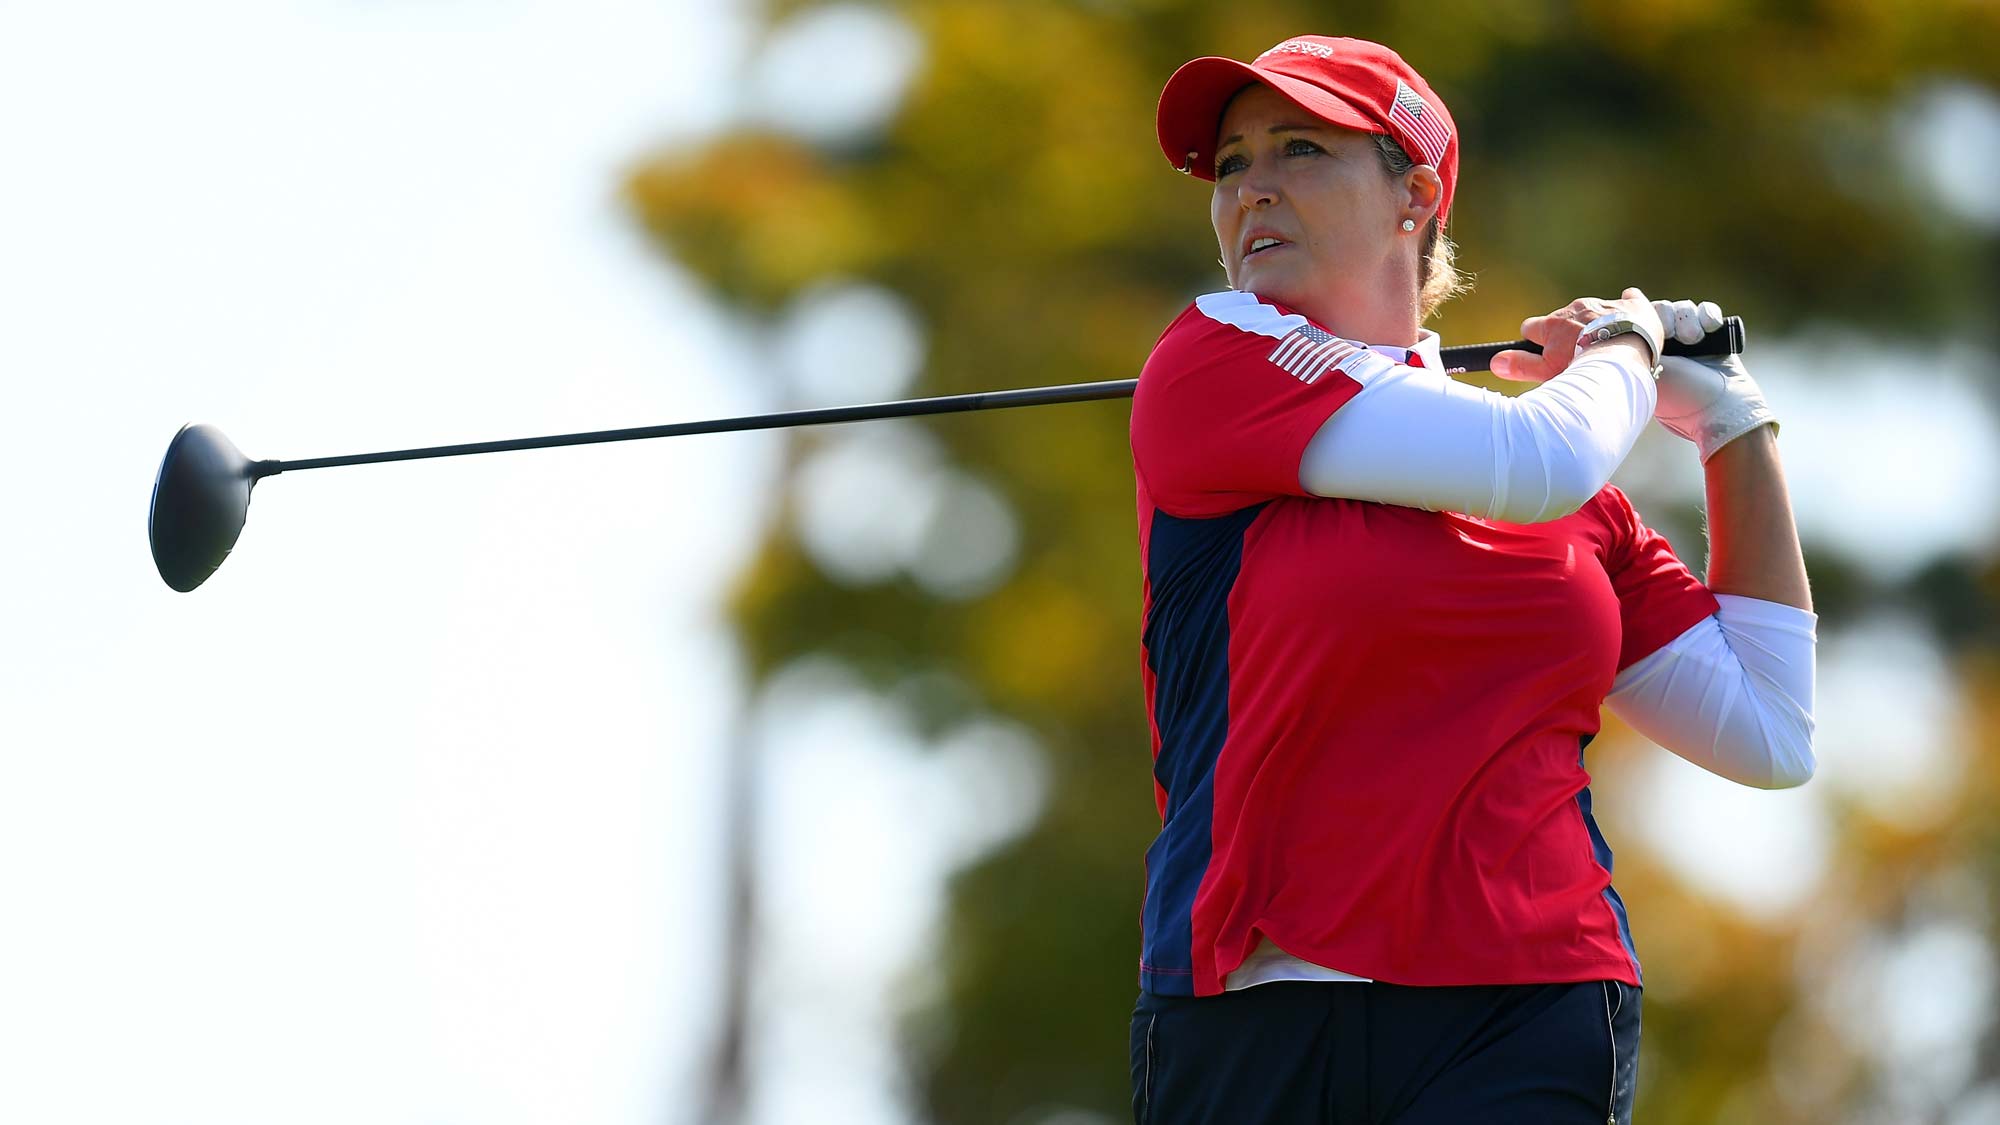 Cristie Kerr of the United States hits a tee shot on the 9th hole during the Singles match against Georgia Hall of England on day four of the UL International Crown